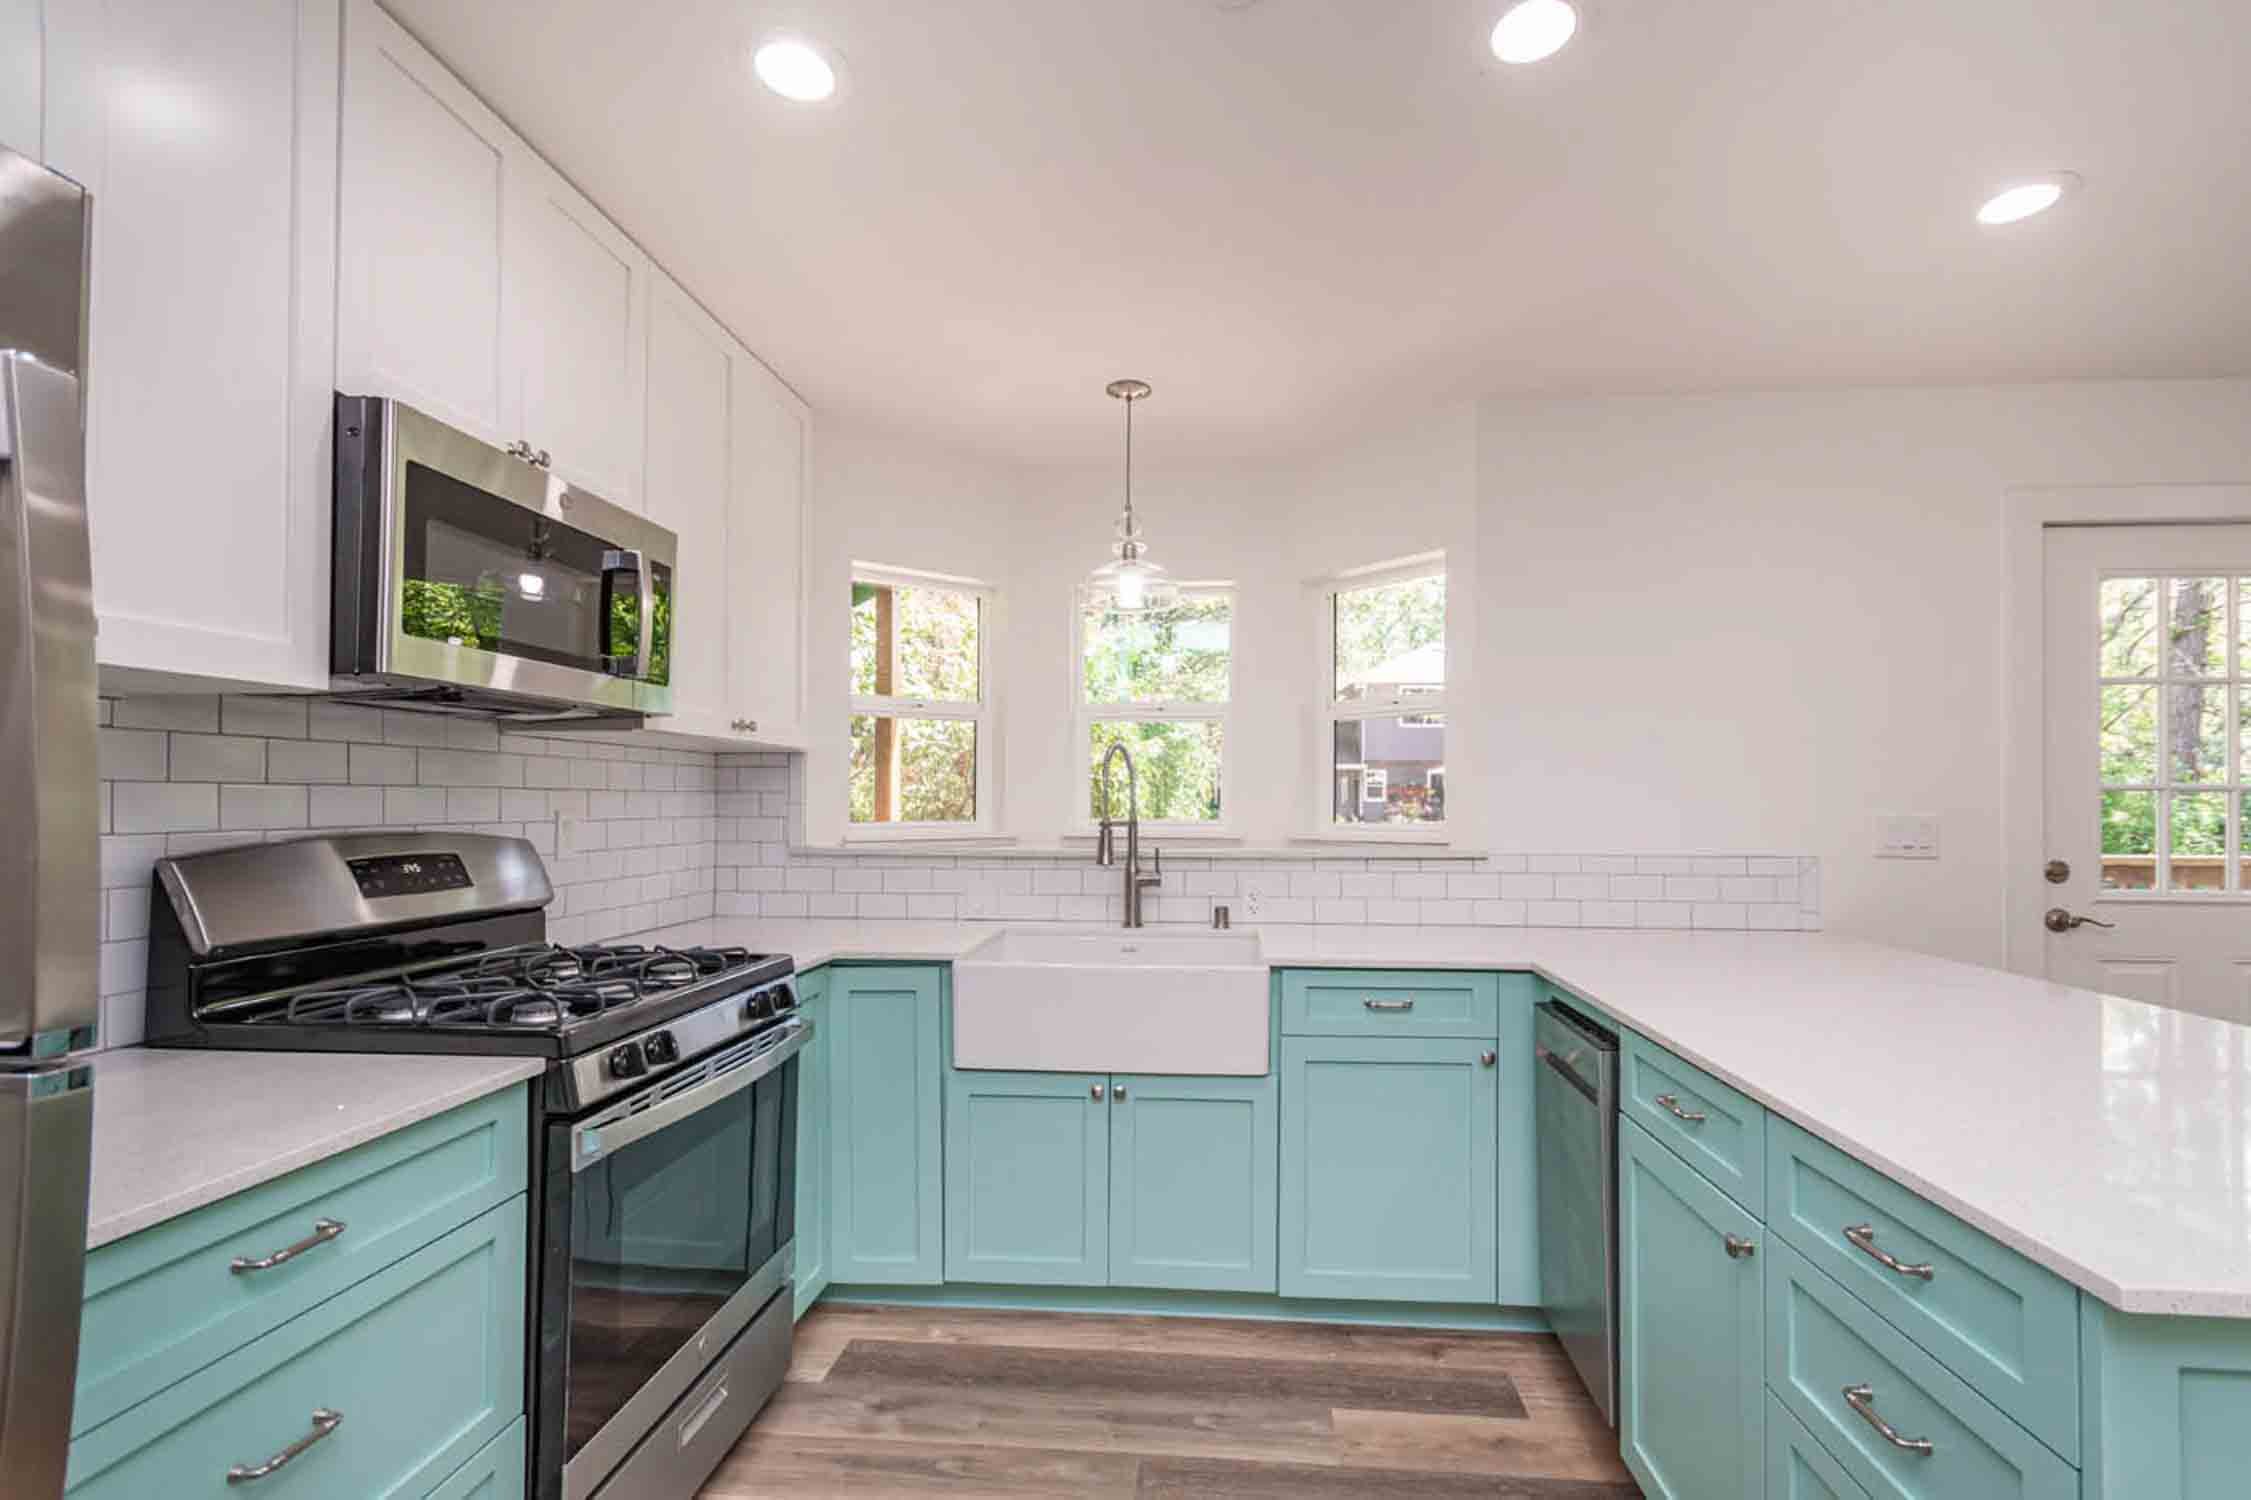 Salt Lake City tiny house companies and their project of a mint green kitchen in a home.